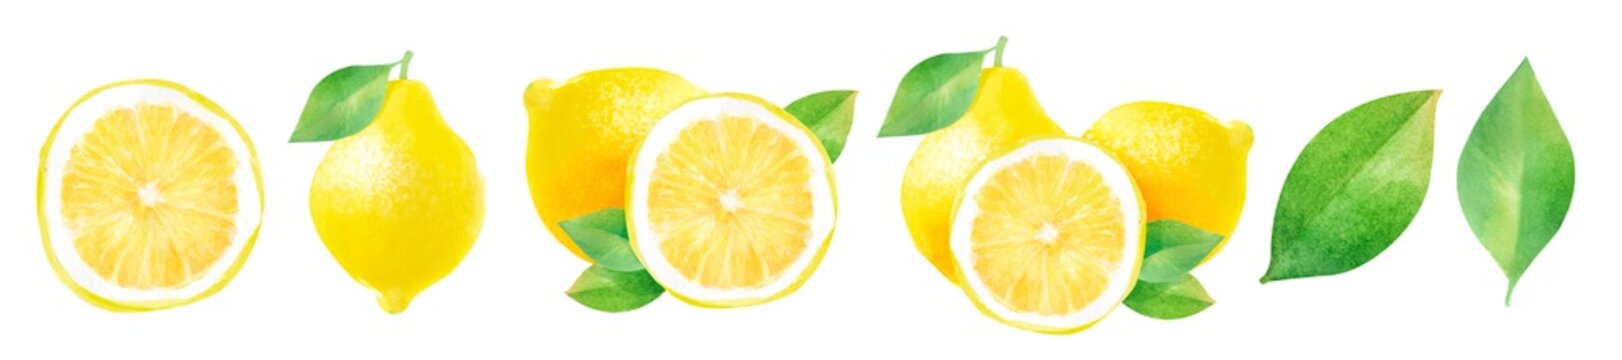 lemons and half a lemon, watercolor hand-drawn drawing of a fruits, isolated illustration on a white background